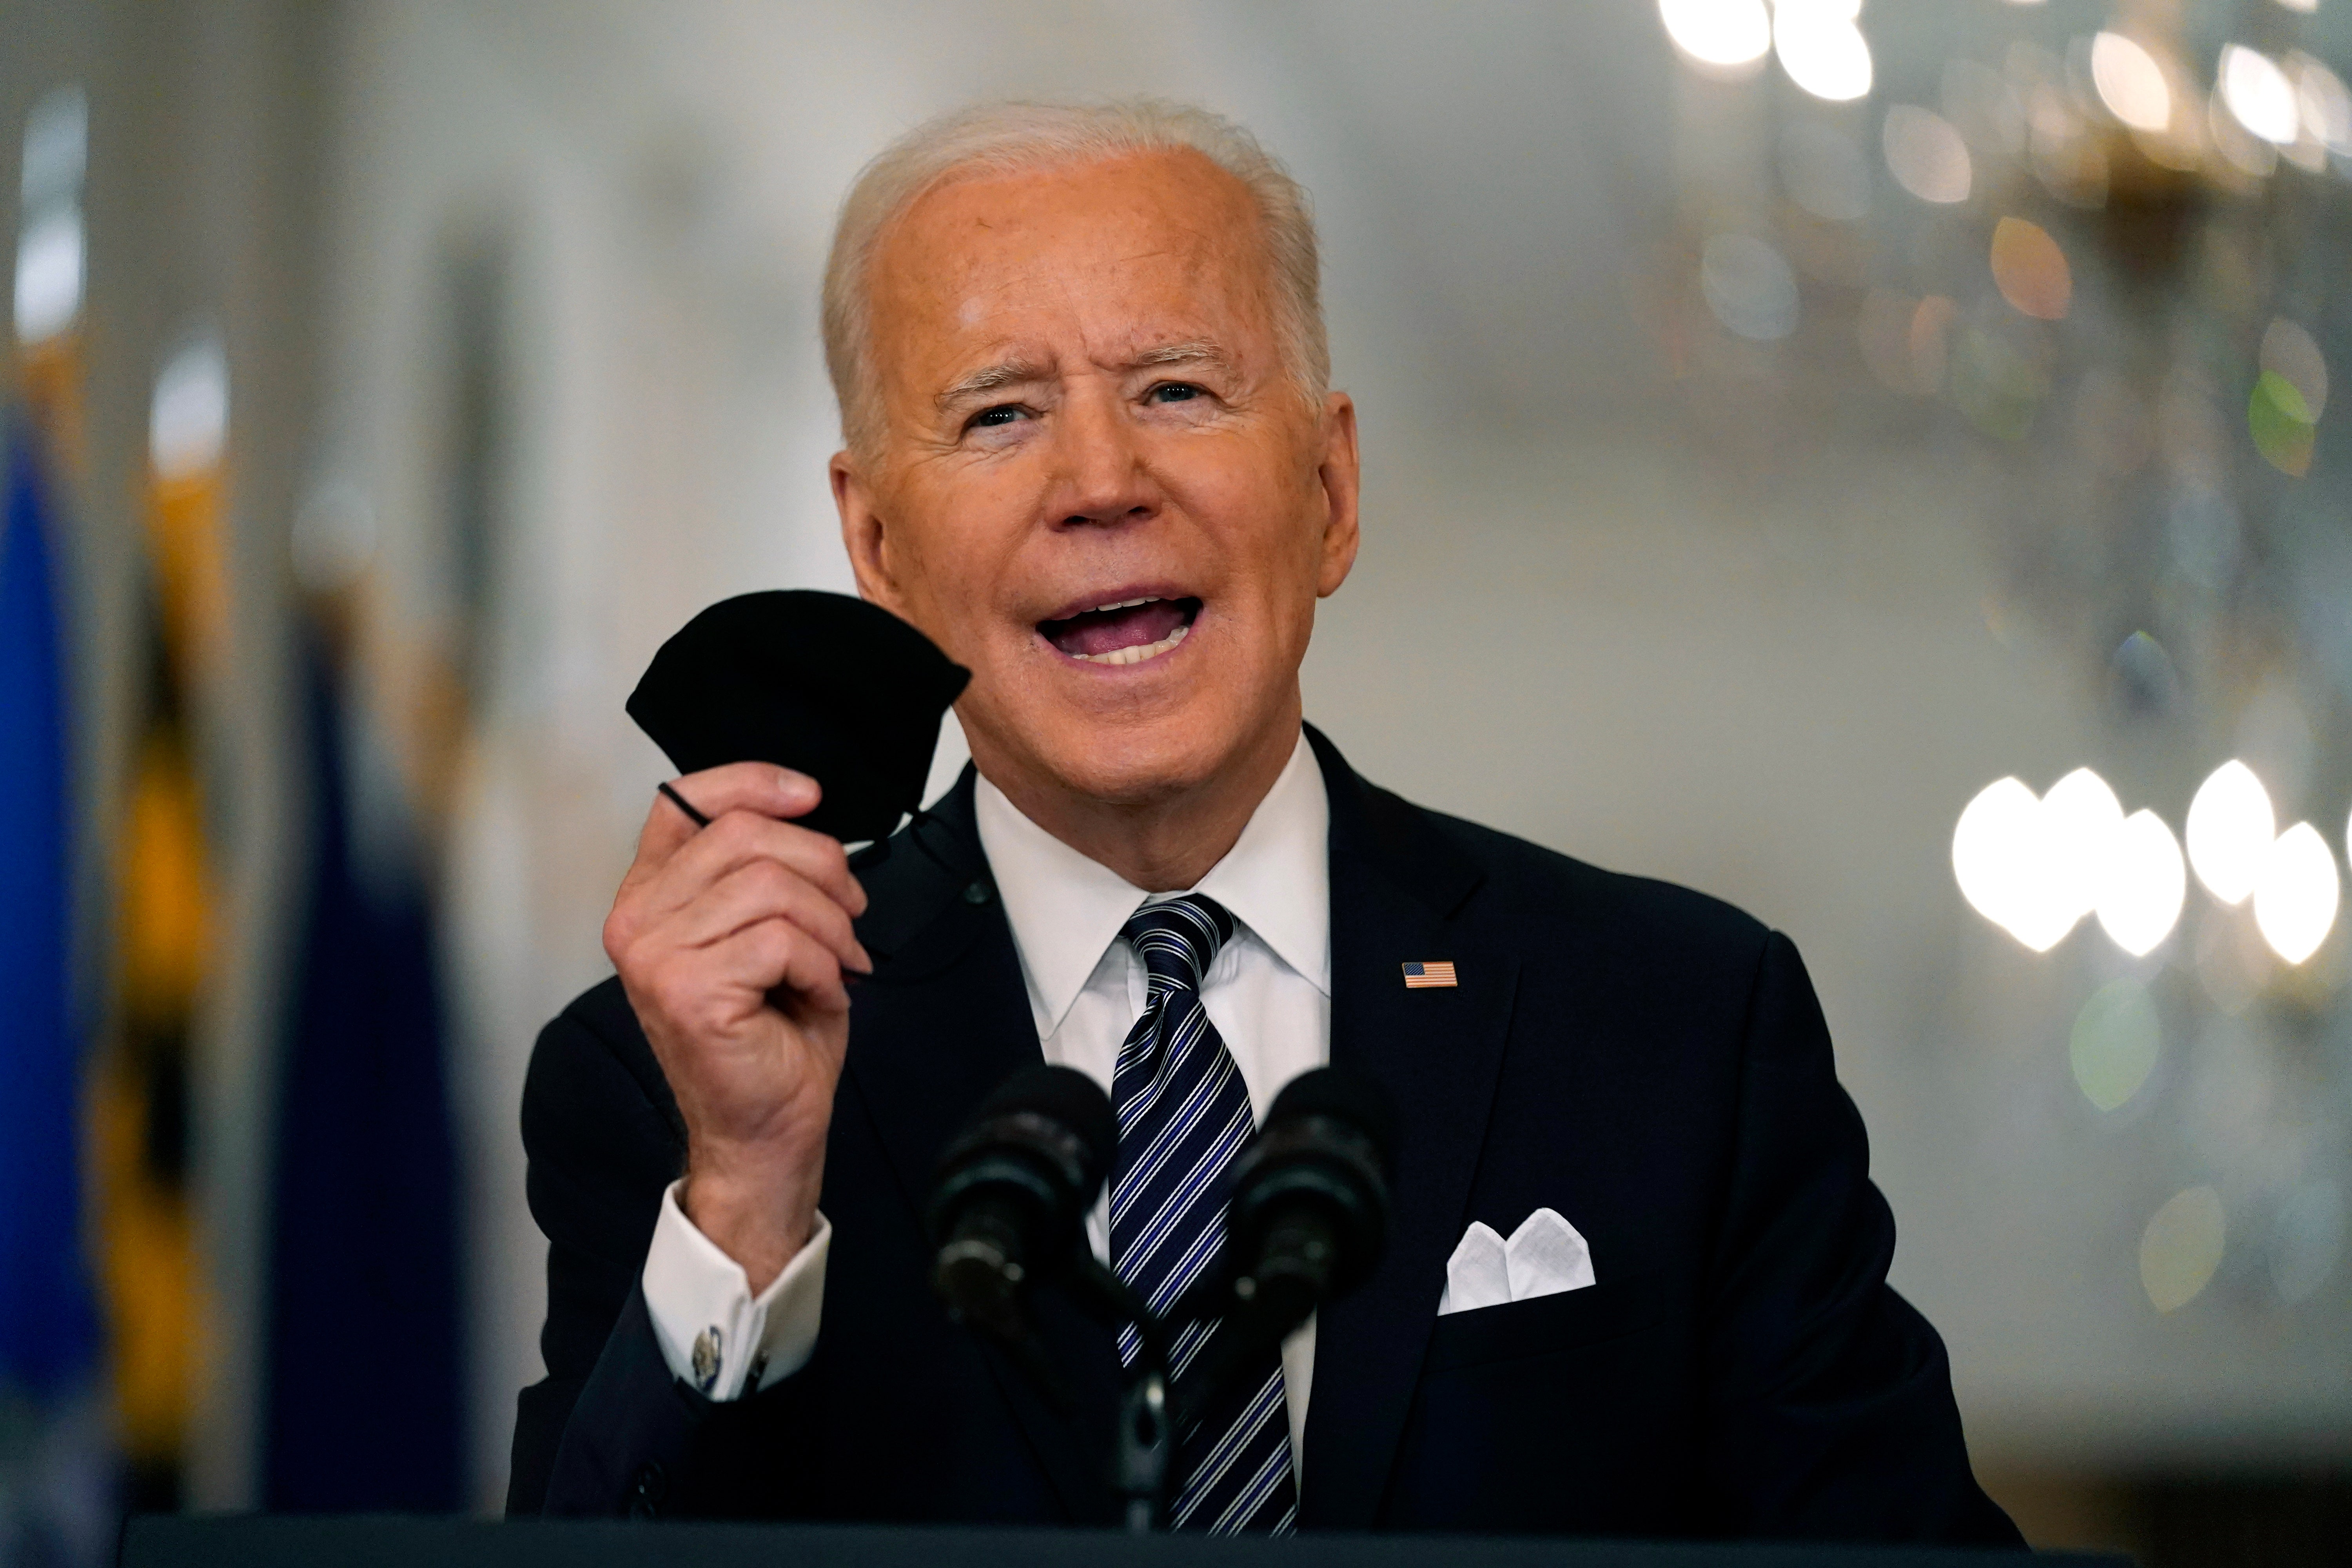 Republicans scratch their heads over Biden’s eligibility for COVID vaccine, fourth family reunion